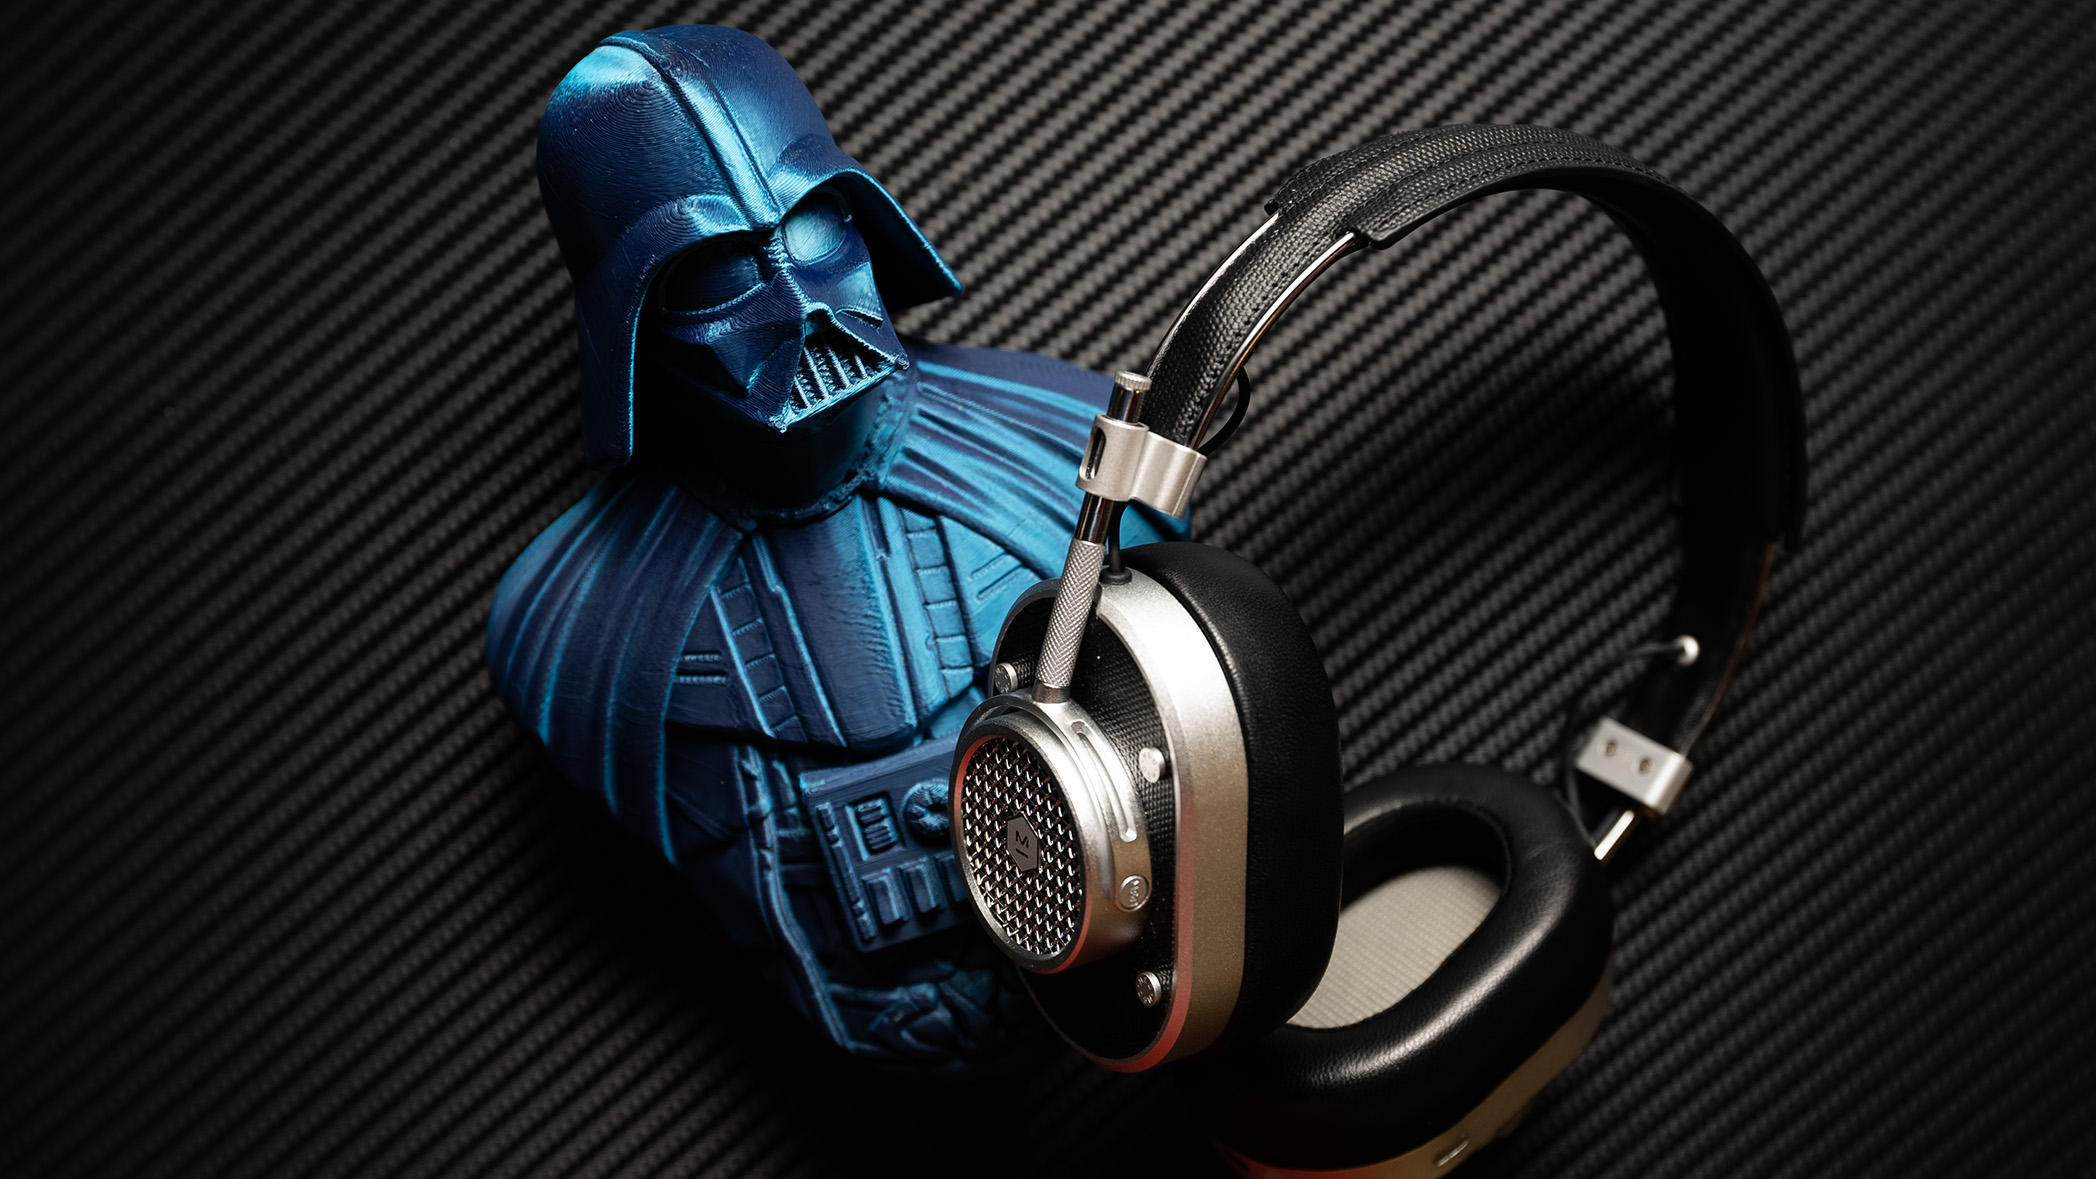 Master &amp; Dynamic MH40 headphones next to a figurine Darth Vader.